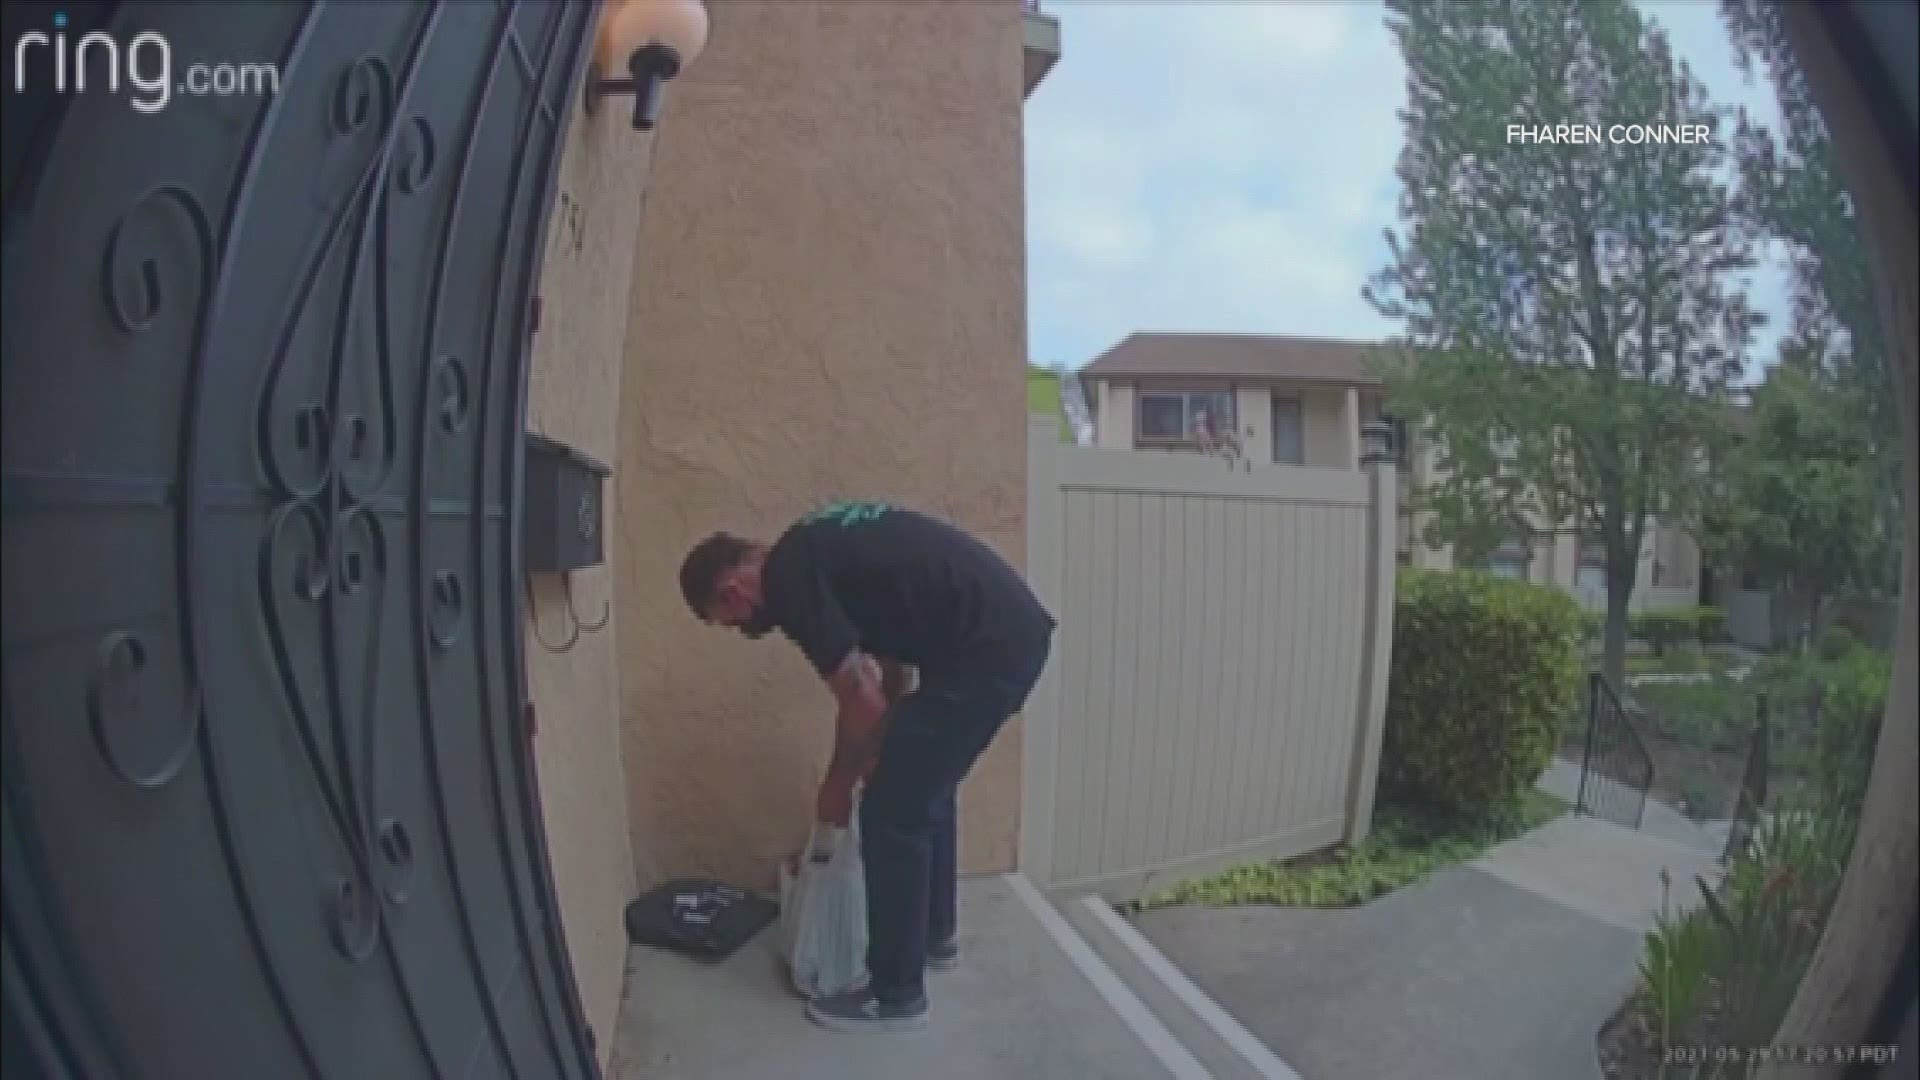 gave Ring doorbell videos to US police 11 times without